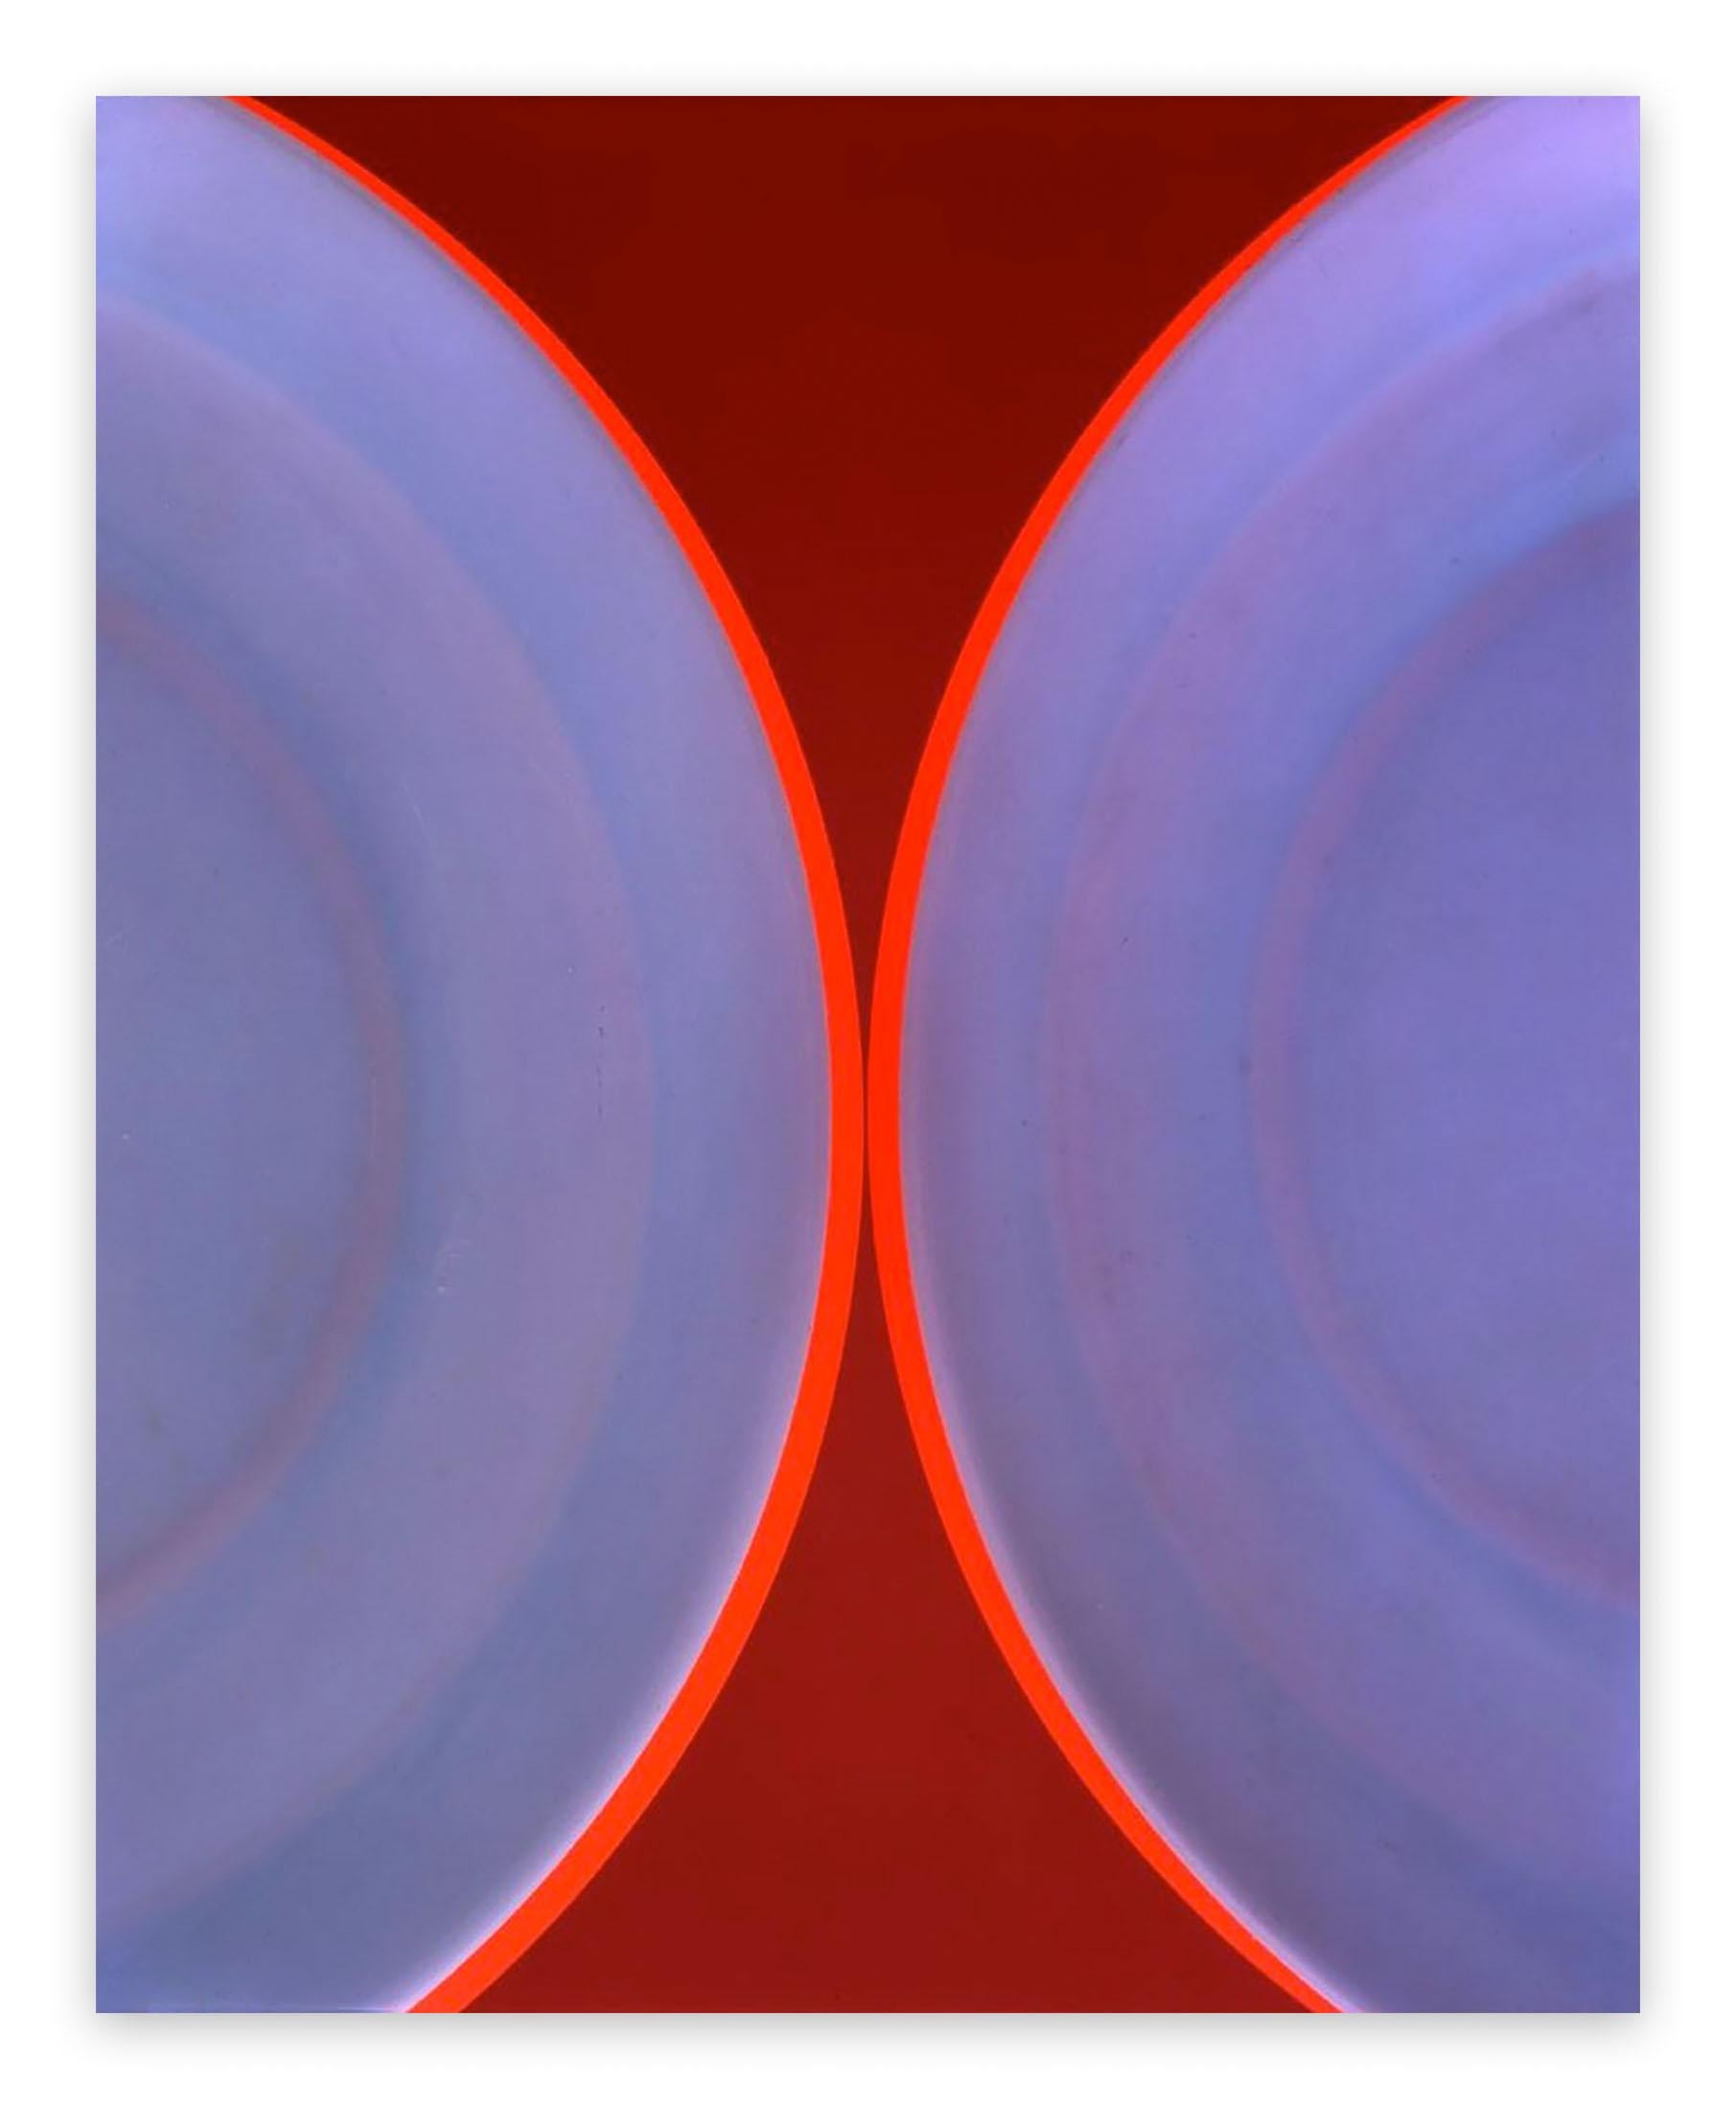 Untitled 136 (Abstract Photography)
C print - Unframed.

Richard Caldicott is most well known for this earlier work series which used Tupperware containers as the subject for his photographs.

As he describes: "Tupperware works used two colour